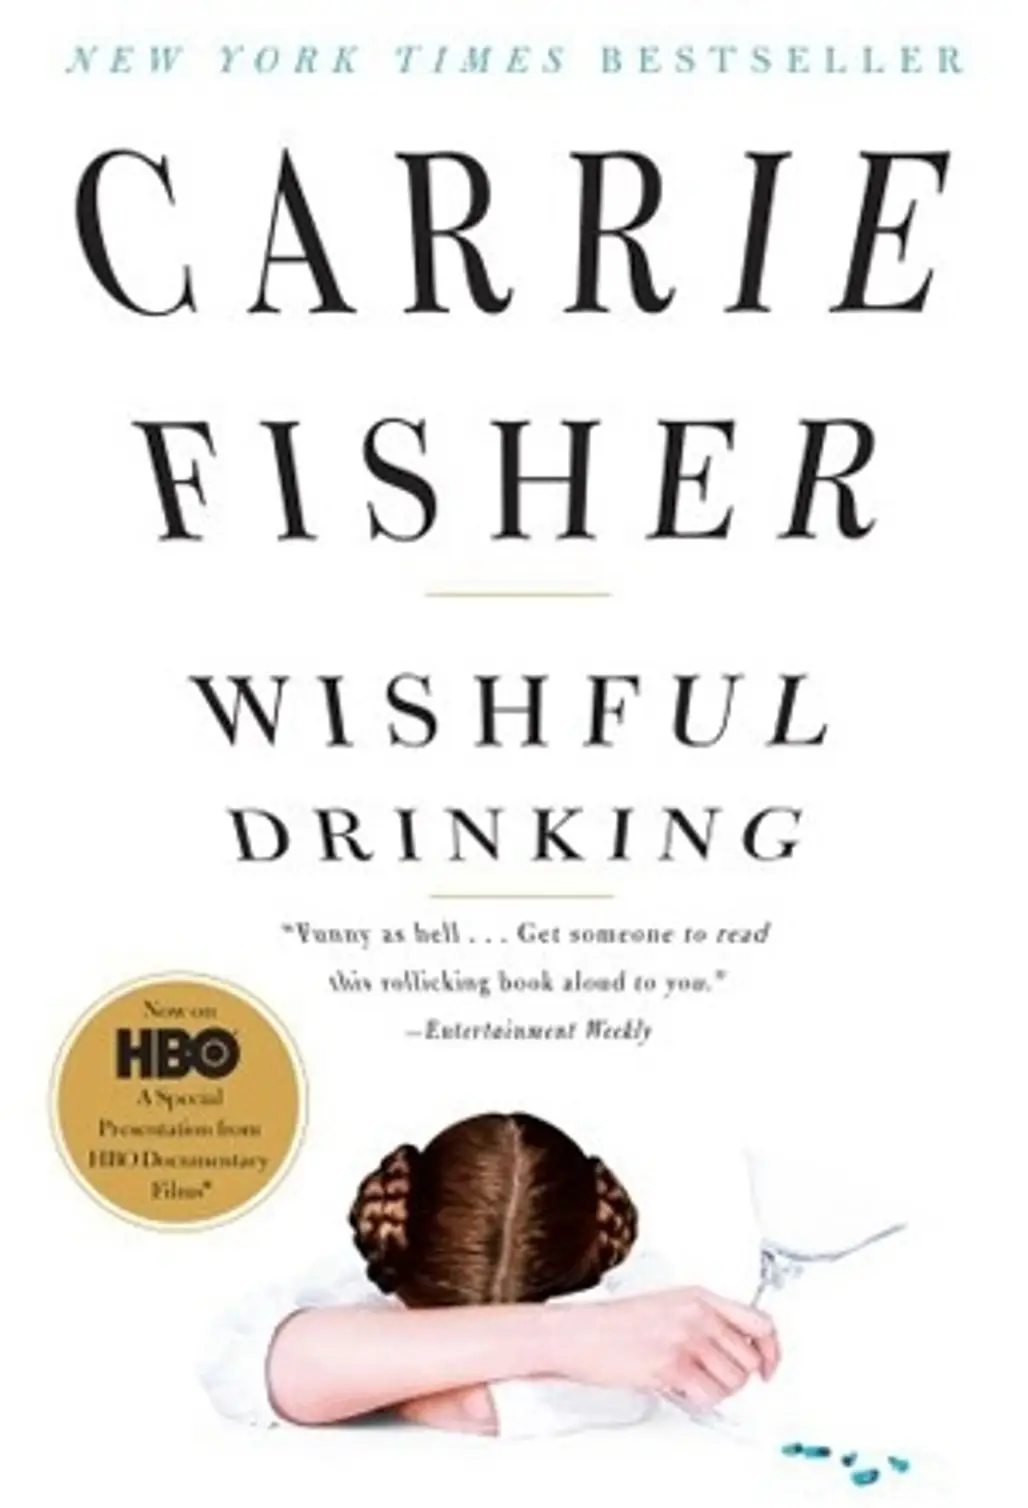 Wishful Drinking, by Carrie Fisher - My Favorite Surprisingly Good Book by a Star Wars Celebrity